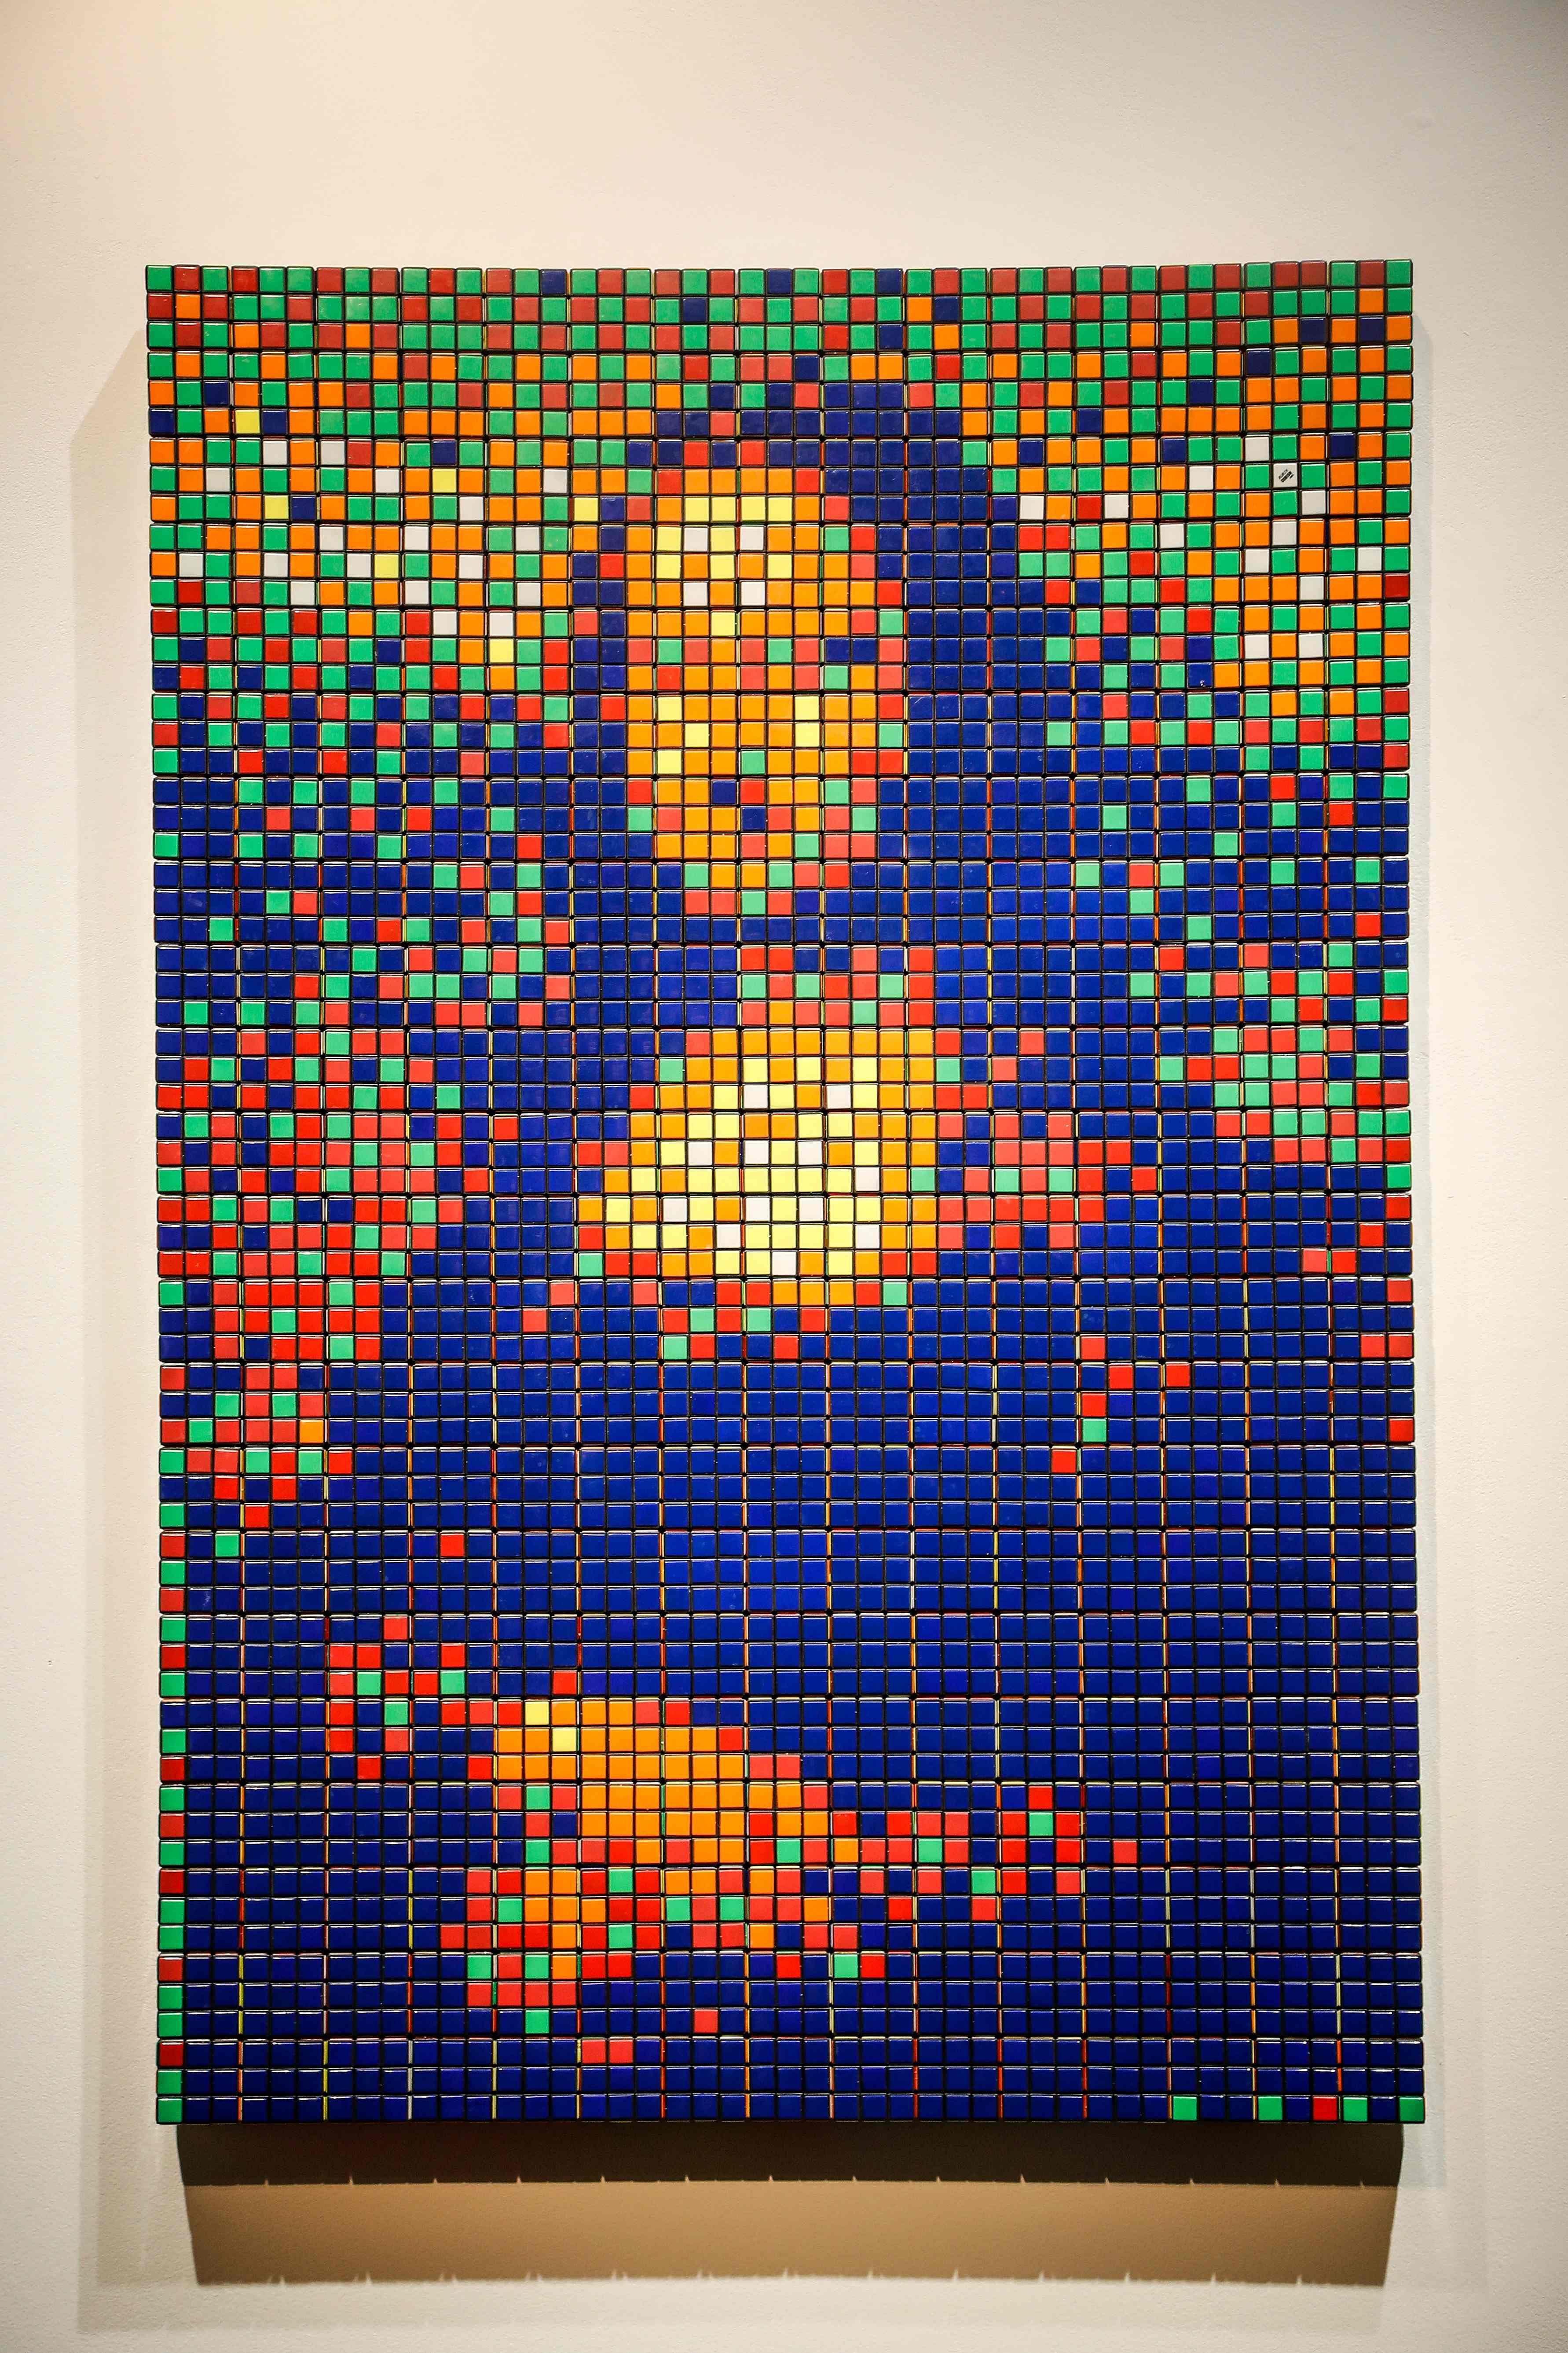 It uses the plastic puzzles' squares to create a mosaic of the Mona Lisa and her famous smile in garish colours. (Credit: AFP Photo)